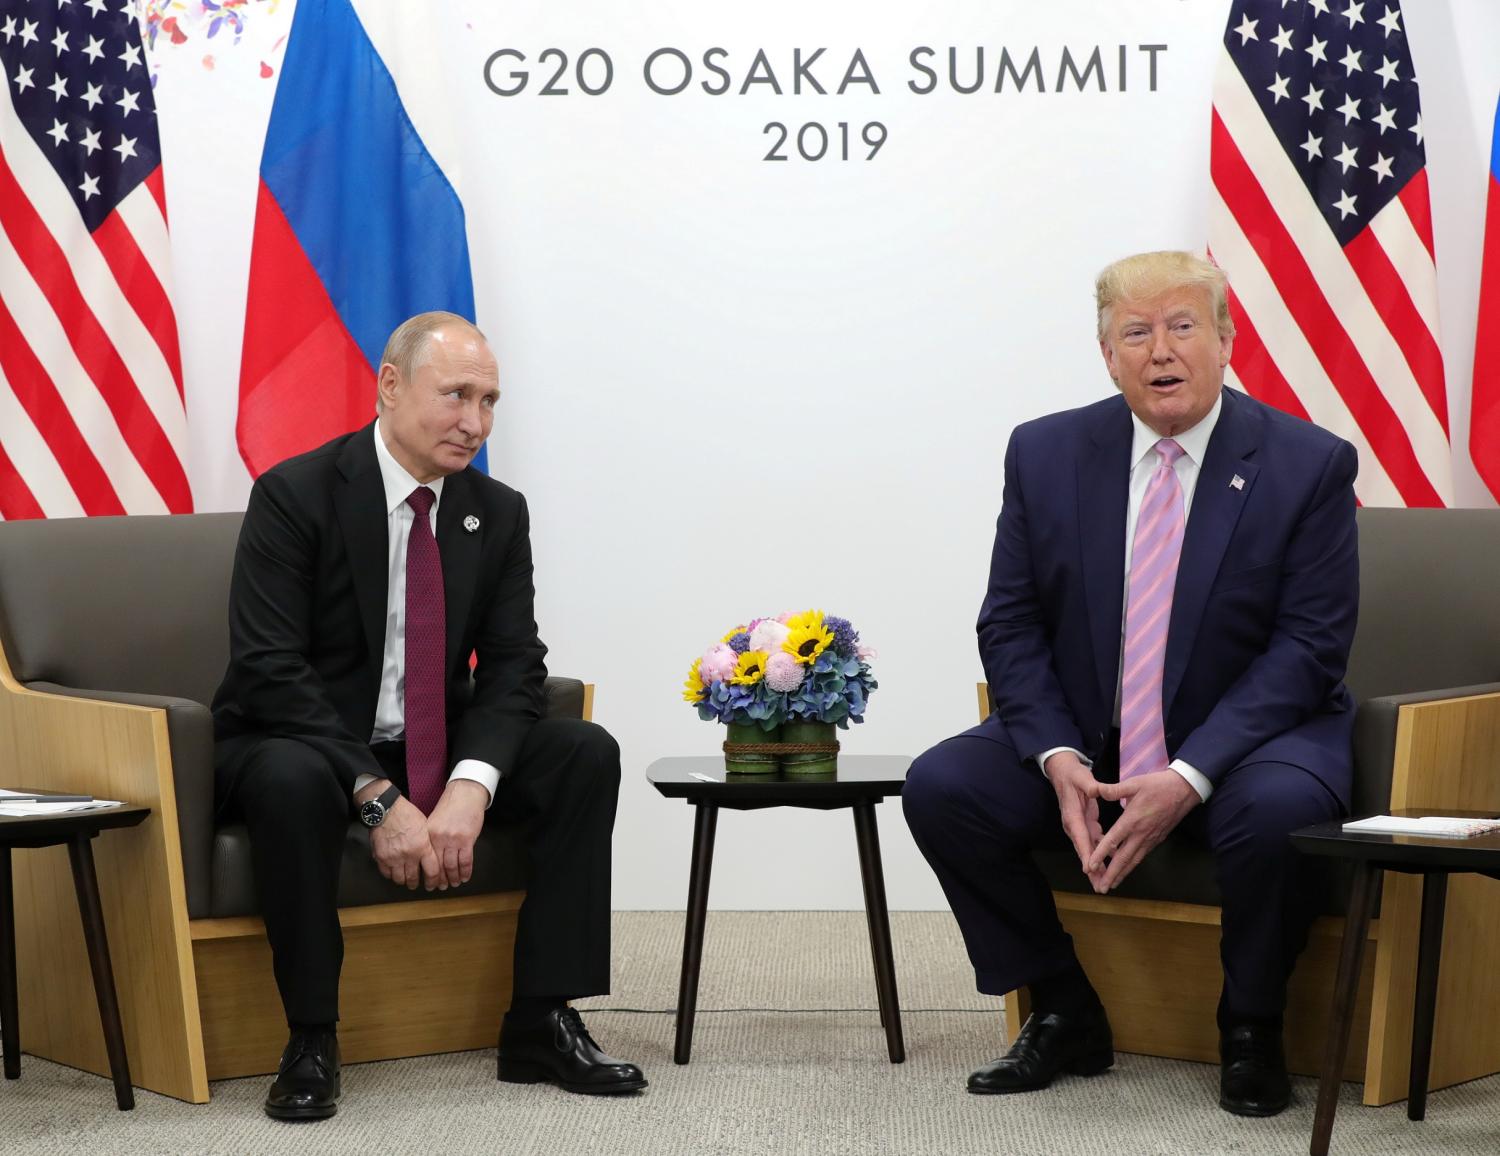 Russia's President Vladimir Putin and U.S. President Donald Trump attend a meeting on the sidelines of the G20 summit in Osaka, Japan June 28, 2019. Sputnik/Mikhail Klimentyev/Kremlin via REUTERS  ATTENTION EDITORS - THIS IMAGE WAS PROVIDED BY A THIRD PARTY. - RC12E21409F0